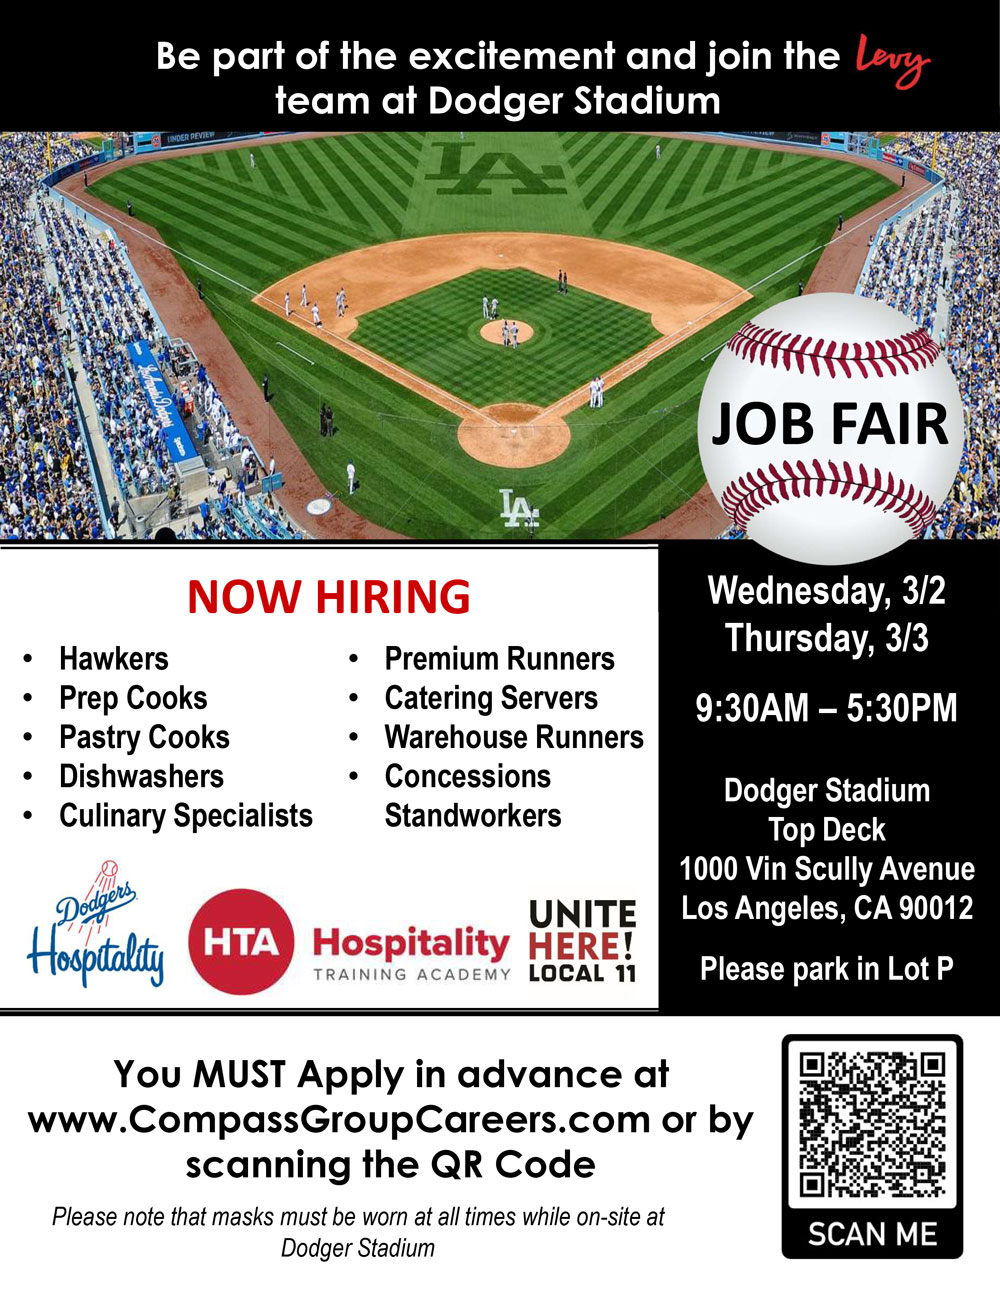 JOIN THE HTA FOR A HIRING EVENT AT DODGER STADIUM 